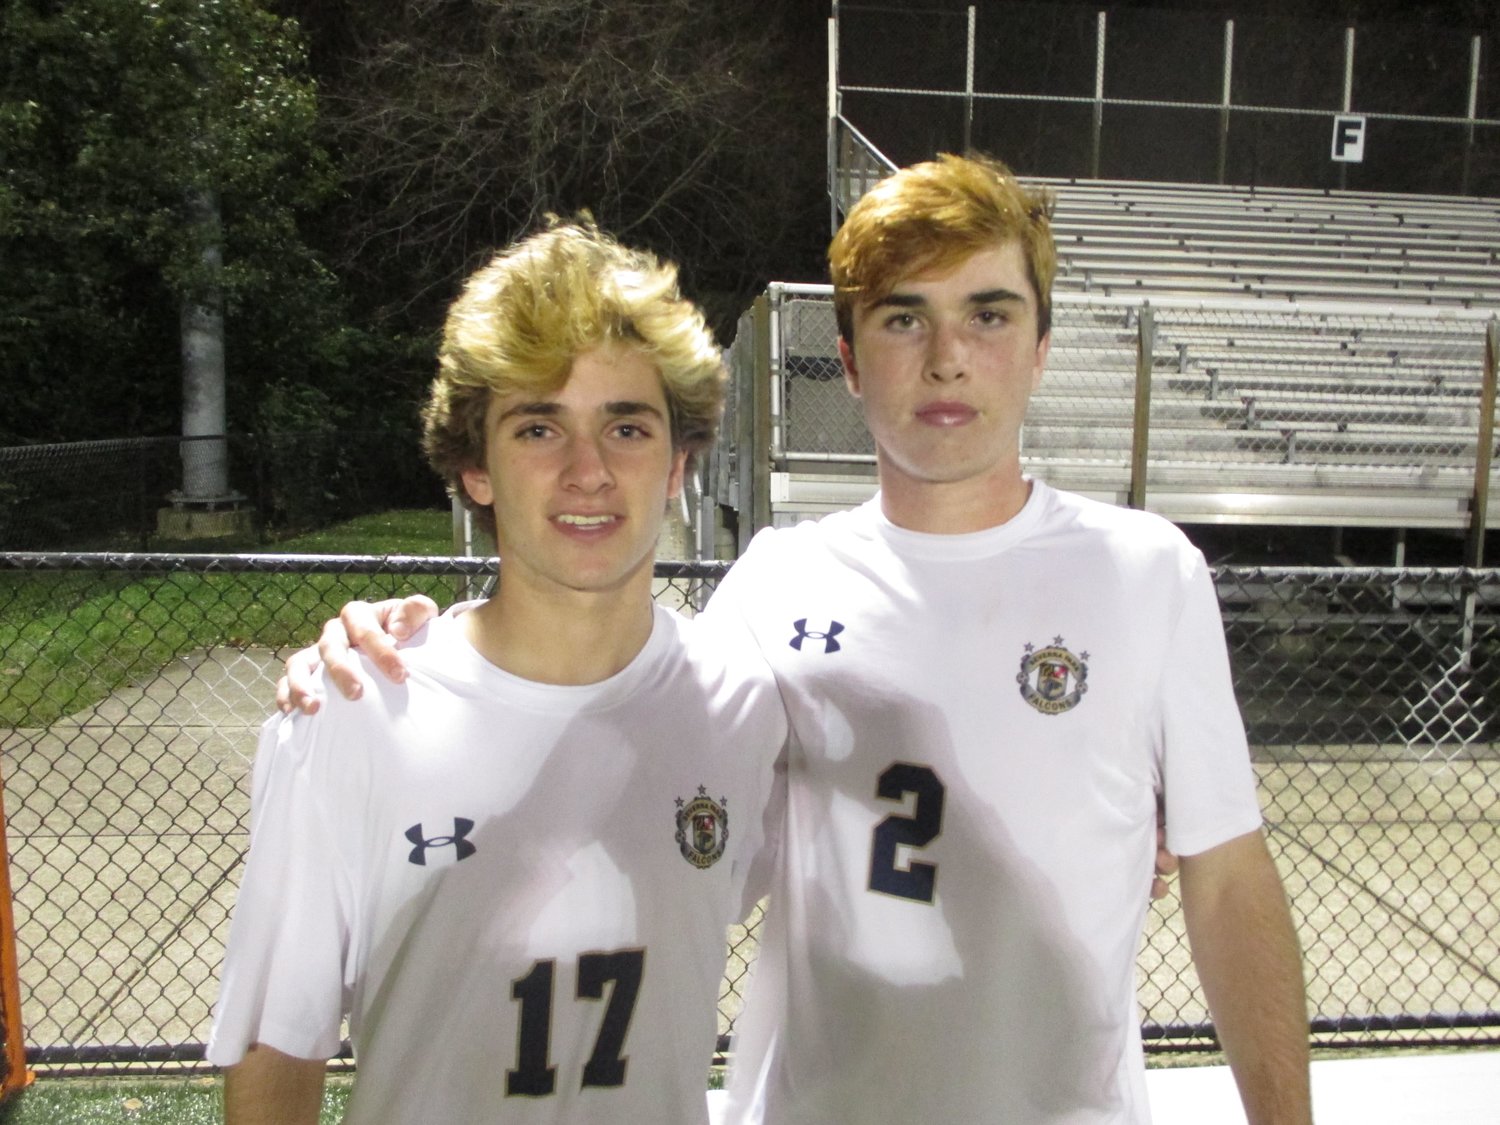 Owen Muldoon (left) and Andrew Campbell each scored goals in Severna Park's 2-1 triumph over Montgomery Blair in the Class 4A state semifinal.